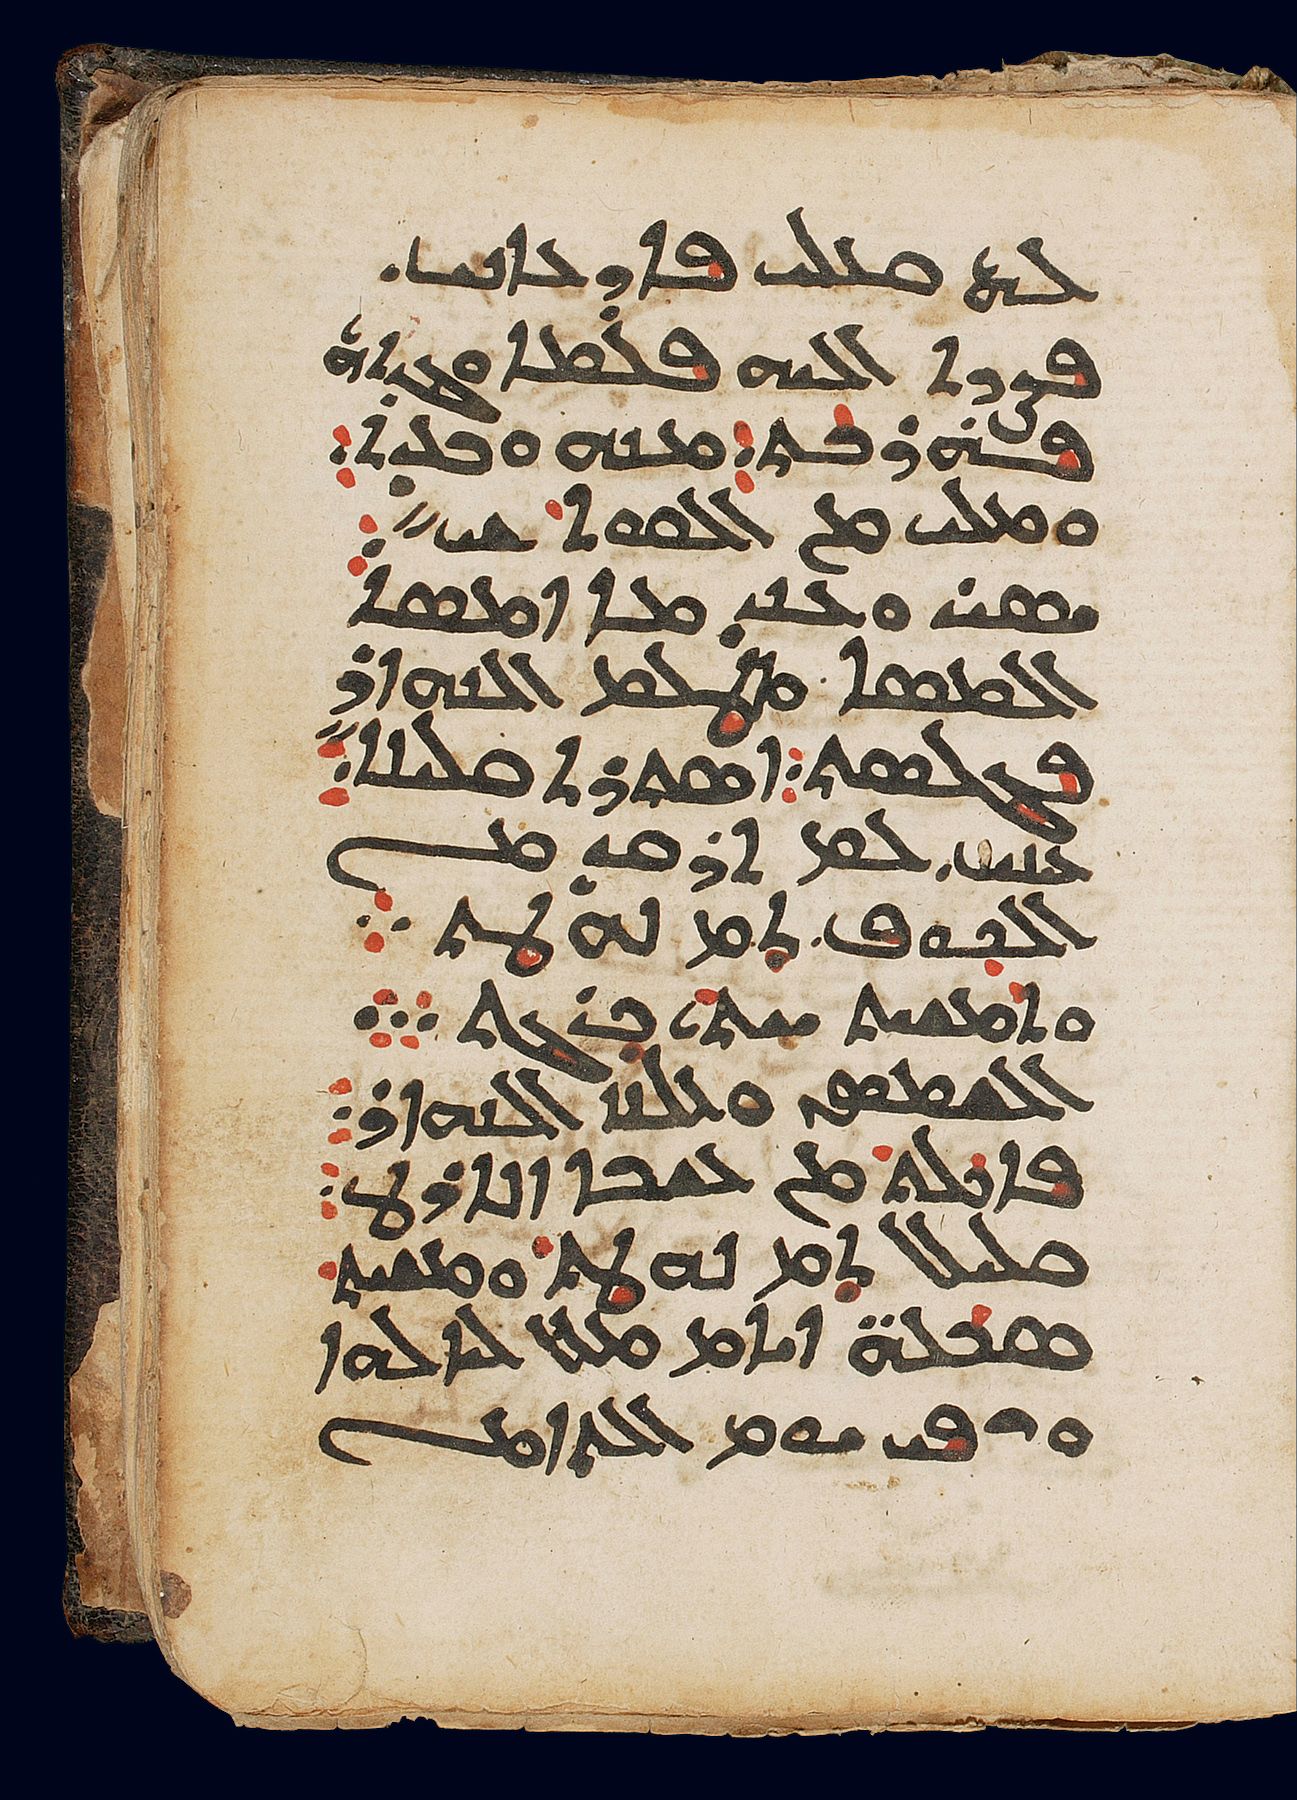 Manuscript from the Syrian Orthodox Church of the Archdiocese of Aleppo (<a href='https://w3id.org/vhmml/readingRoom/view/508531'>SOAA 124 M</a>)